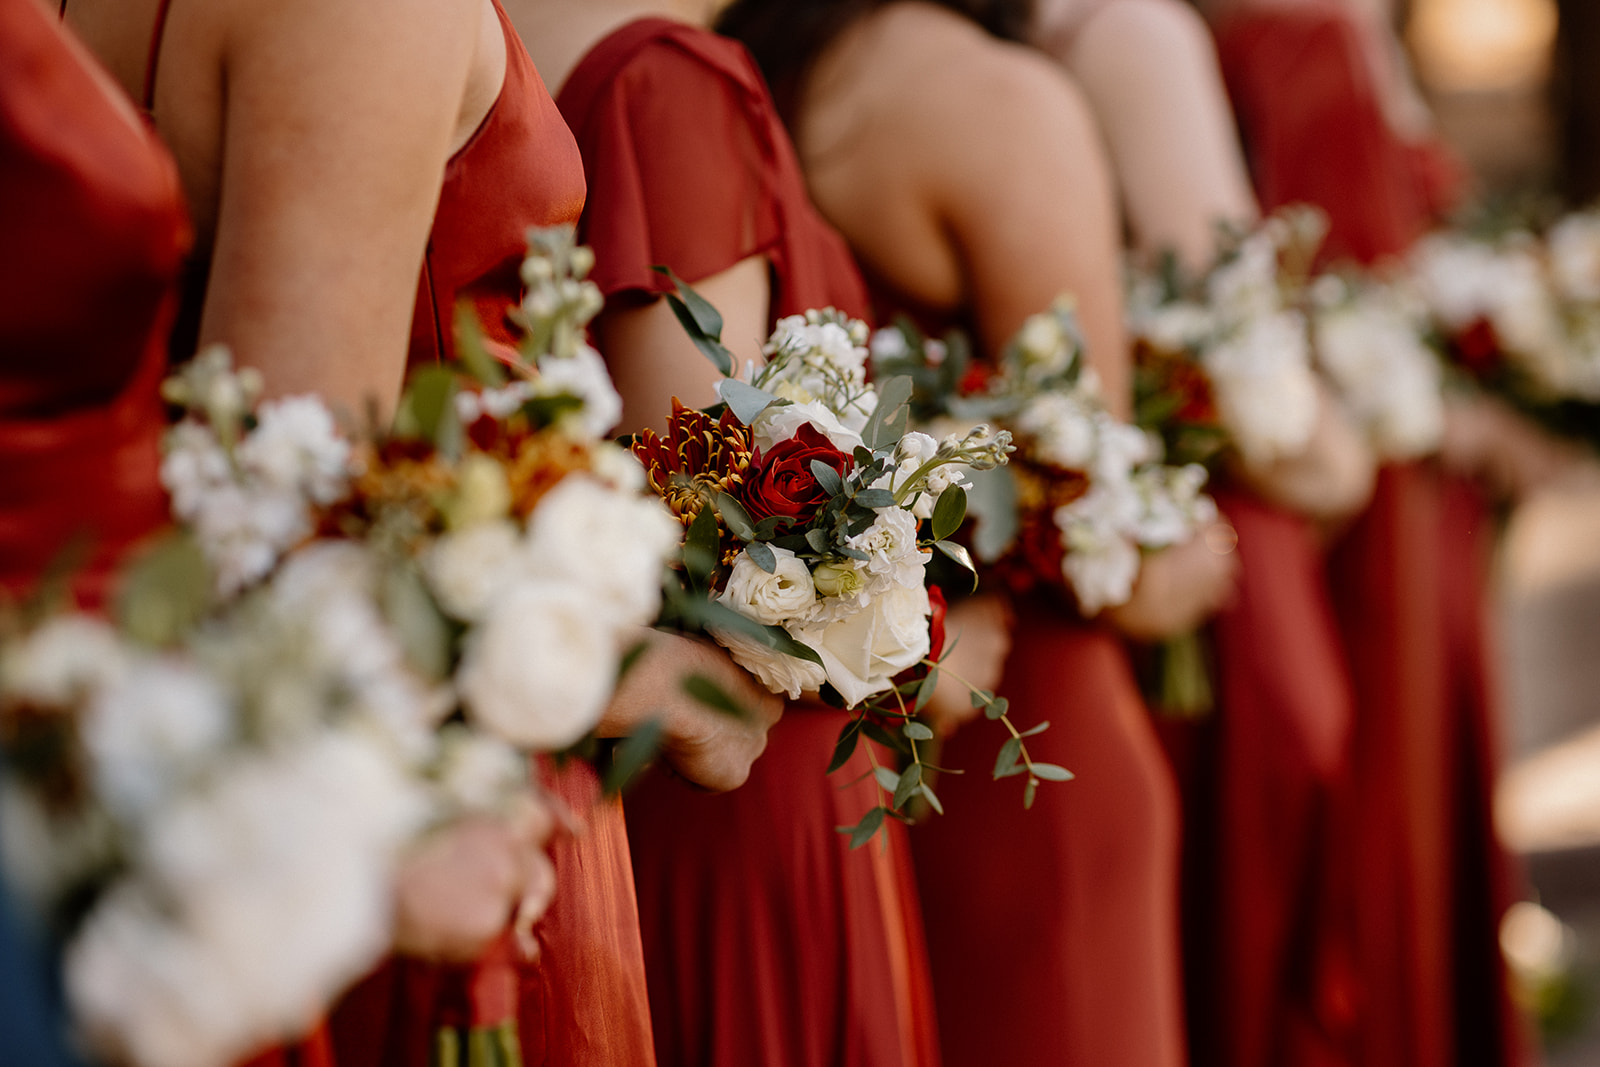 Detail shot of the bridemaids and her bouquet